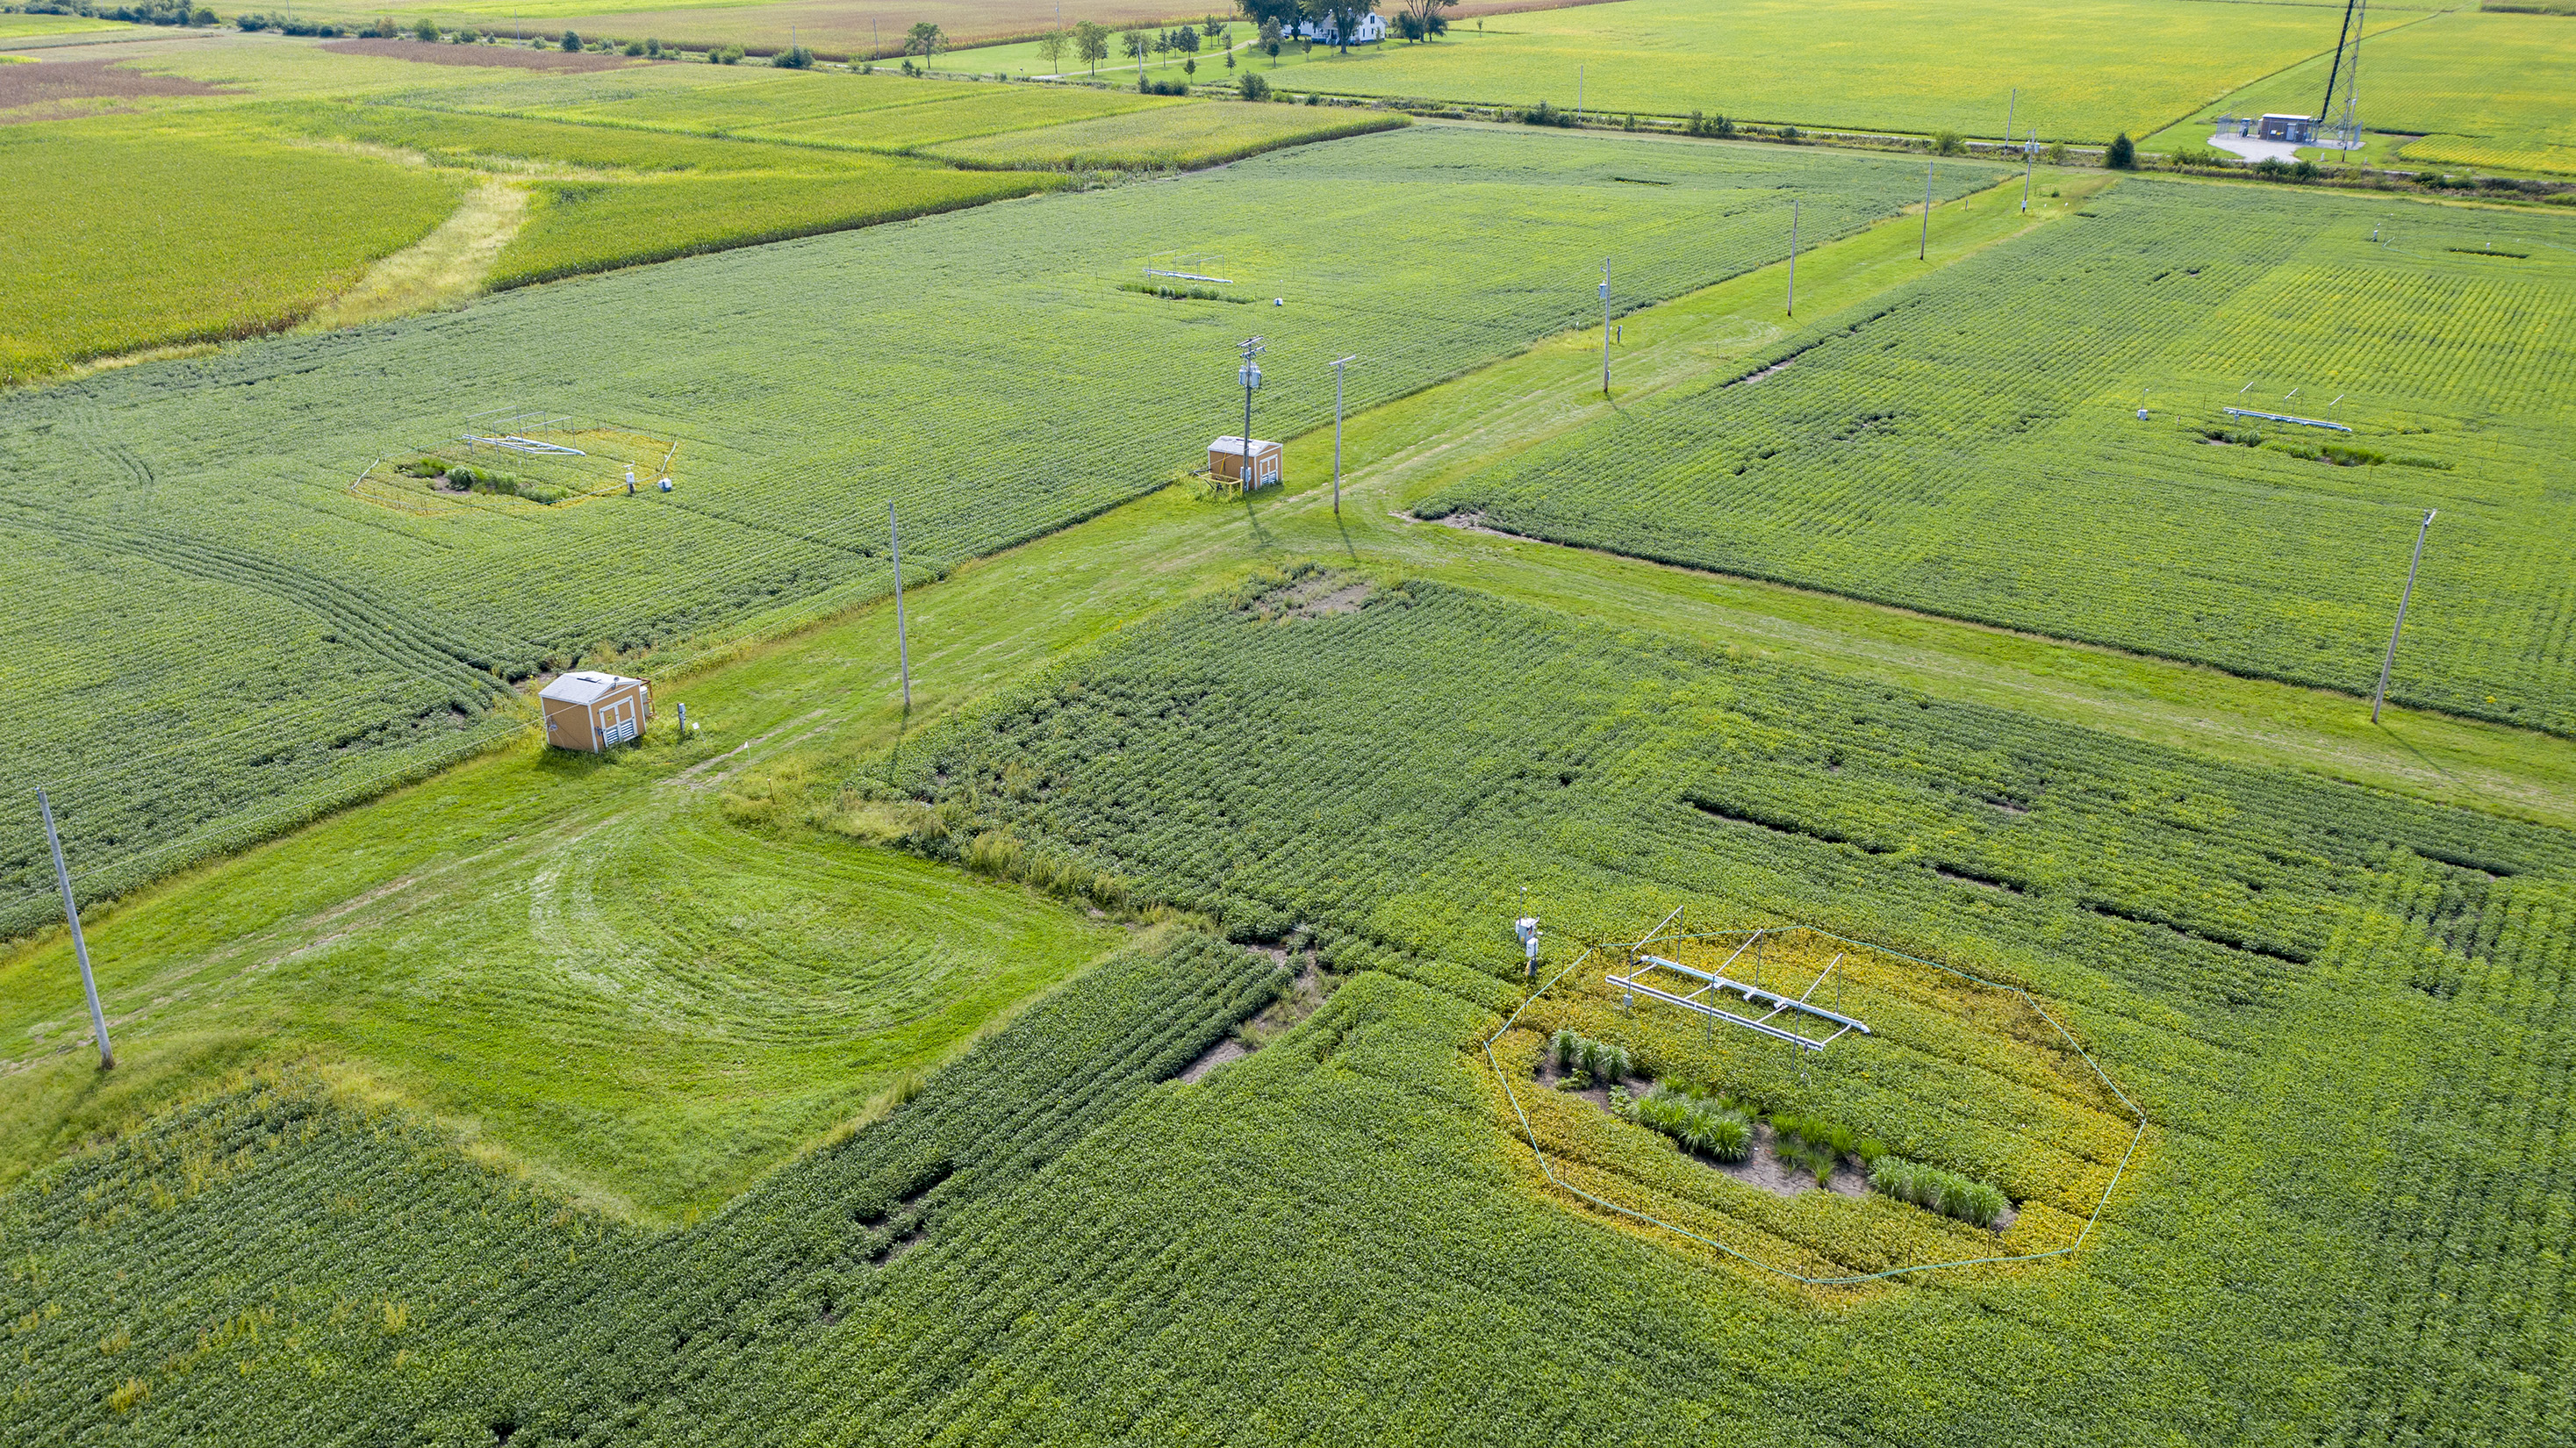 An aerial image of the SoyFACE research facility.